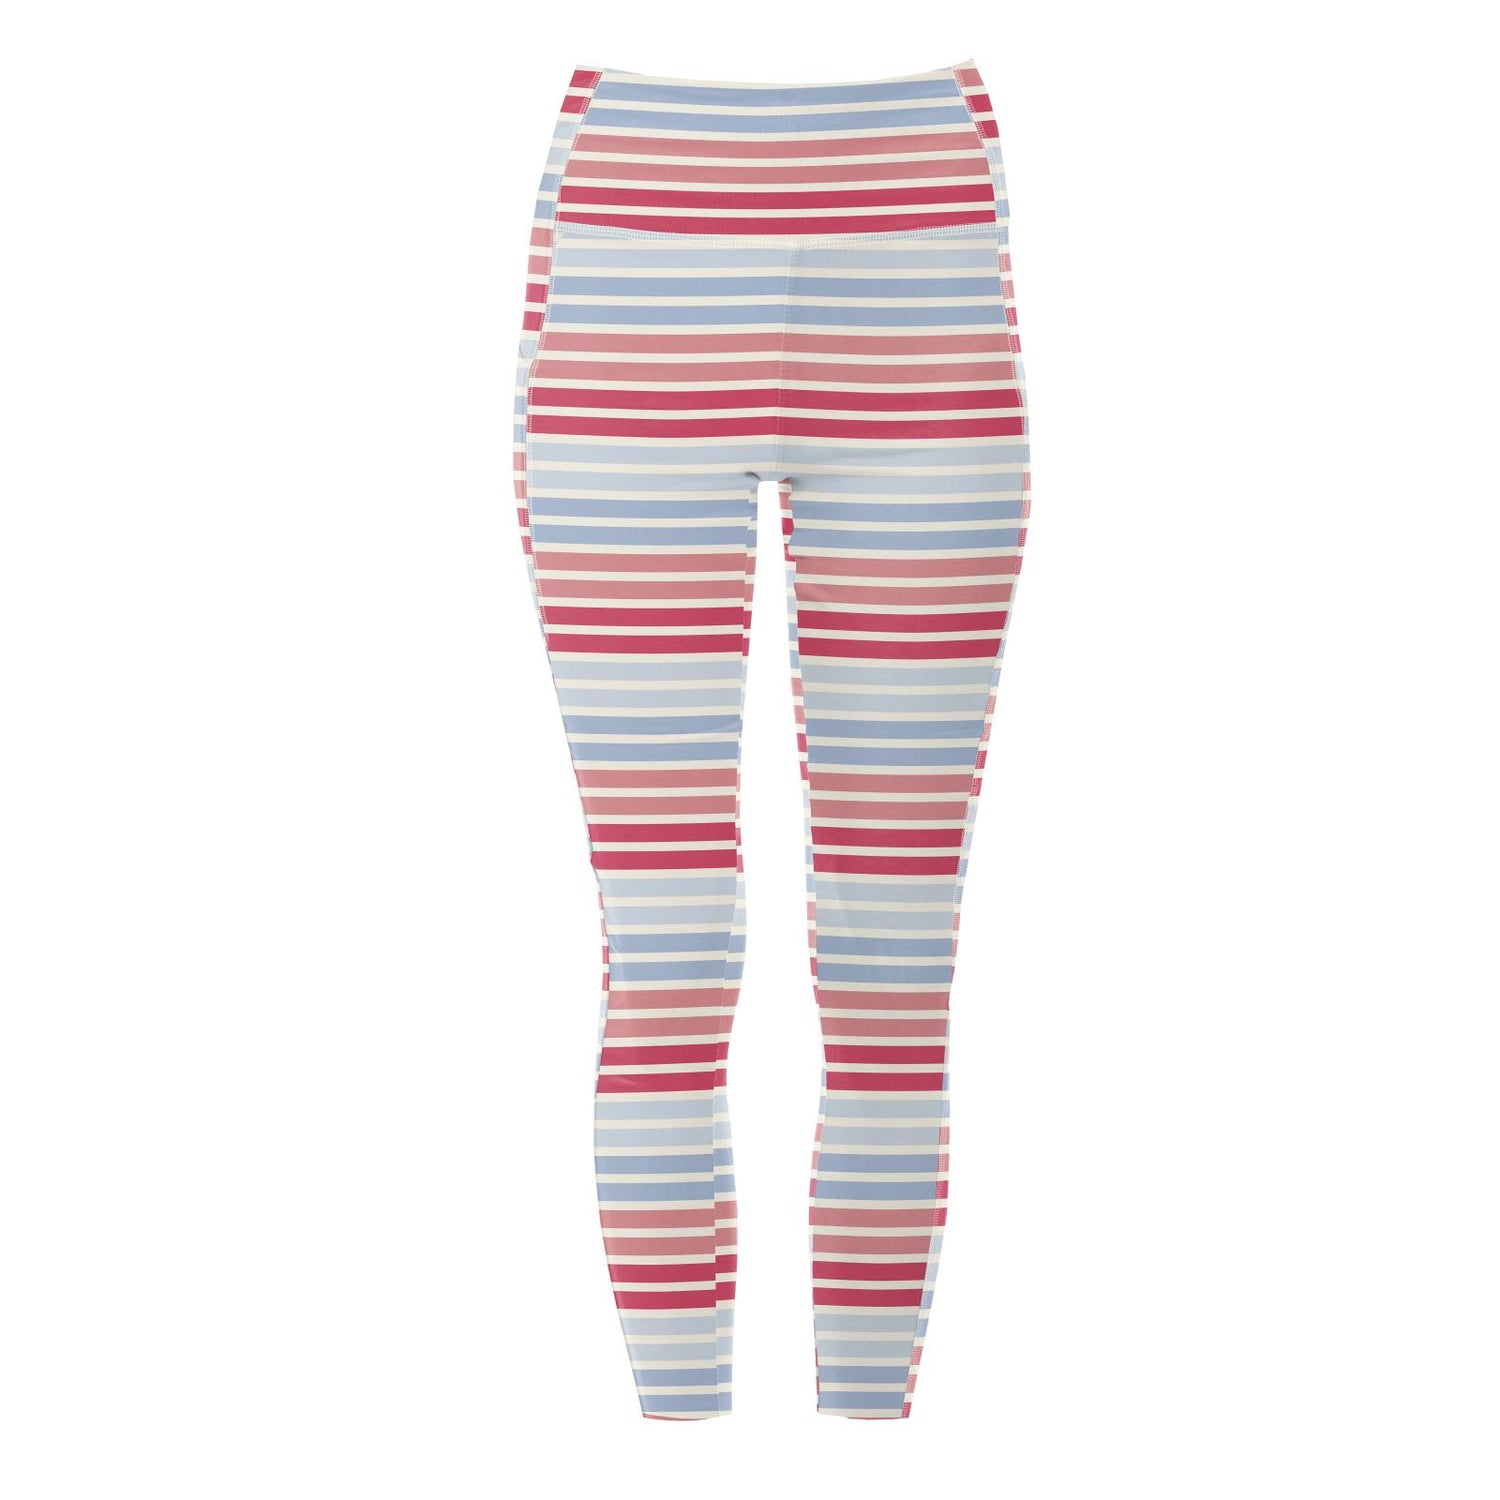 Women's Print Luxe Stretch 7/8 Leggings with Pockets in Cotton Candy Stripe